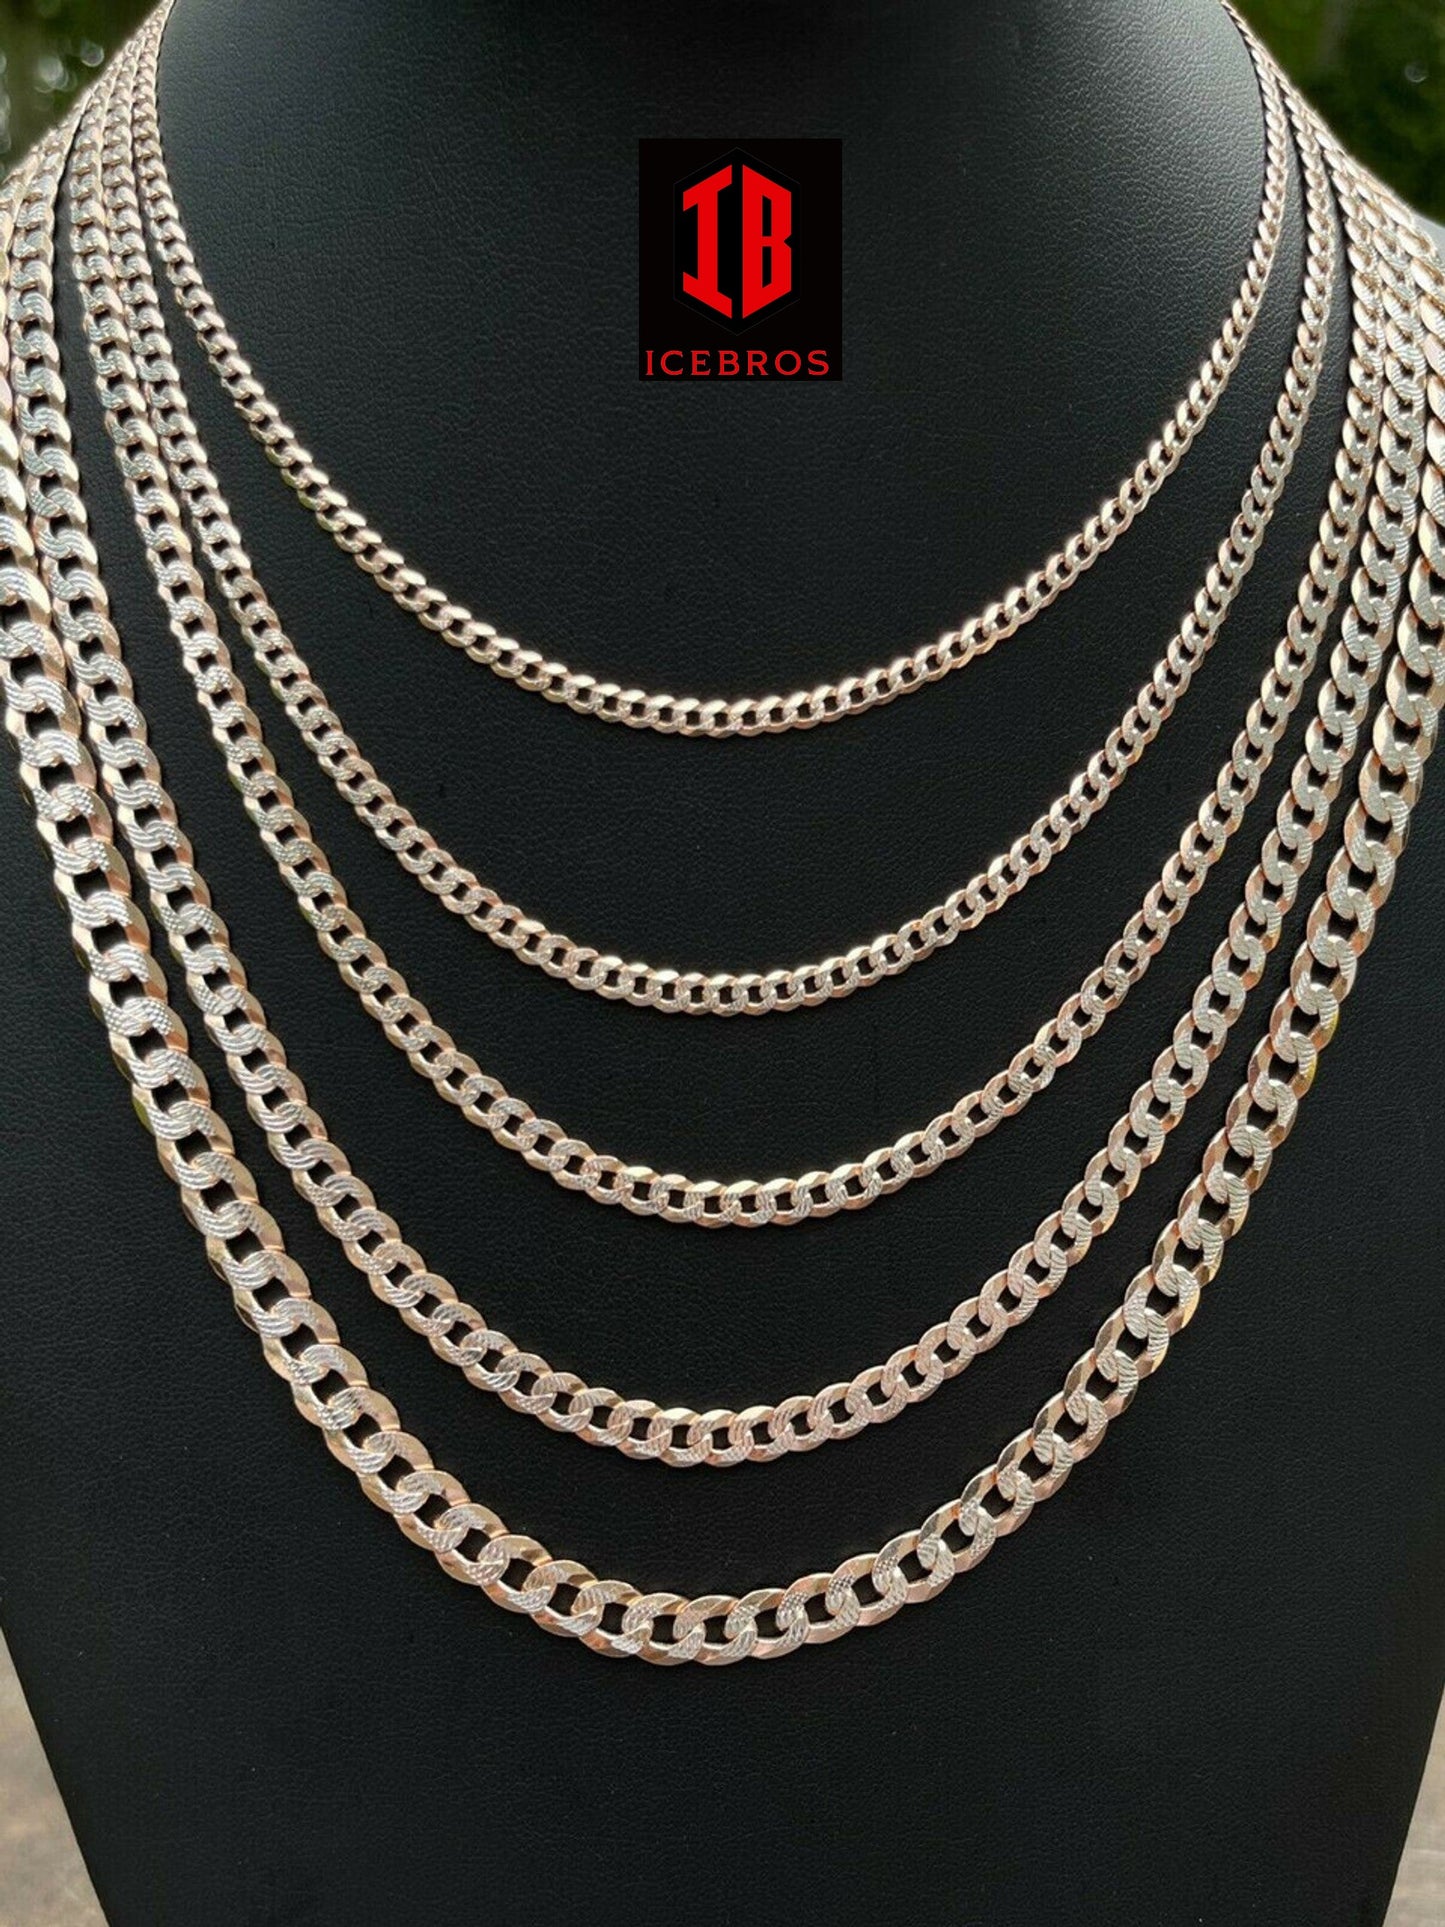 Cuban Link Chain 14k Rose Gold & Solid 925 Silver Diamond Cut Necklace (3-8mm)